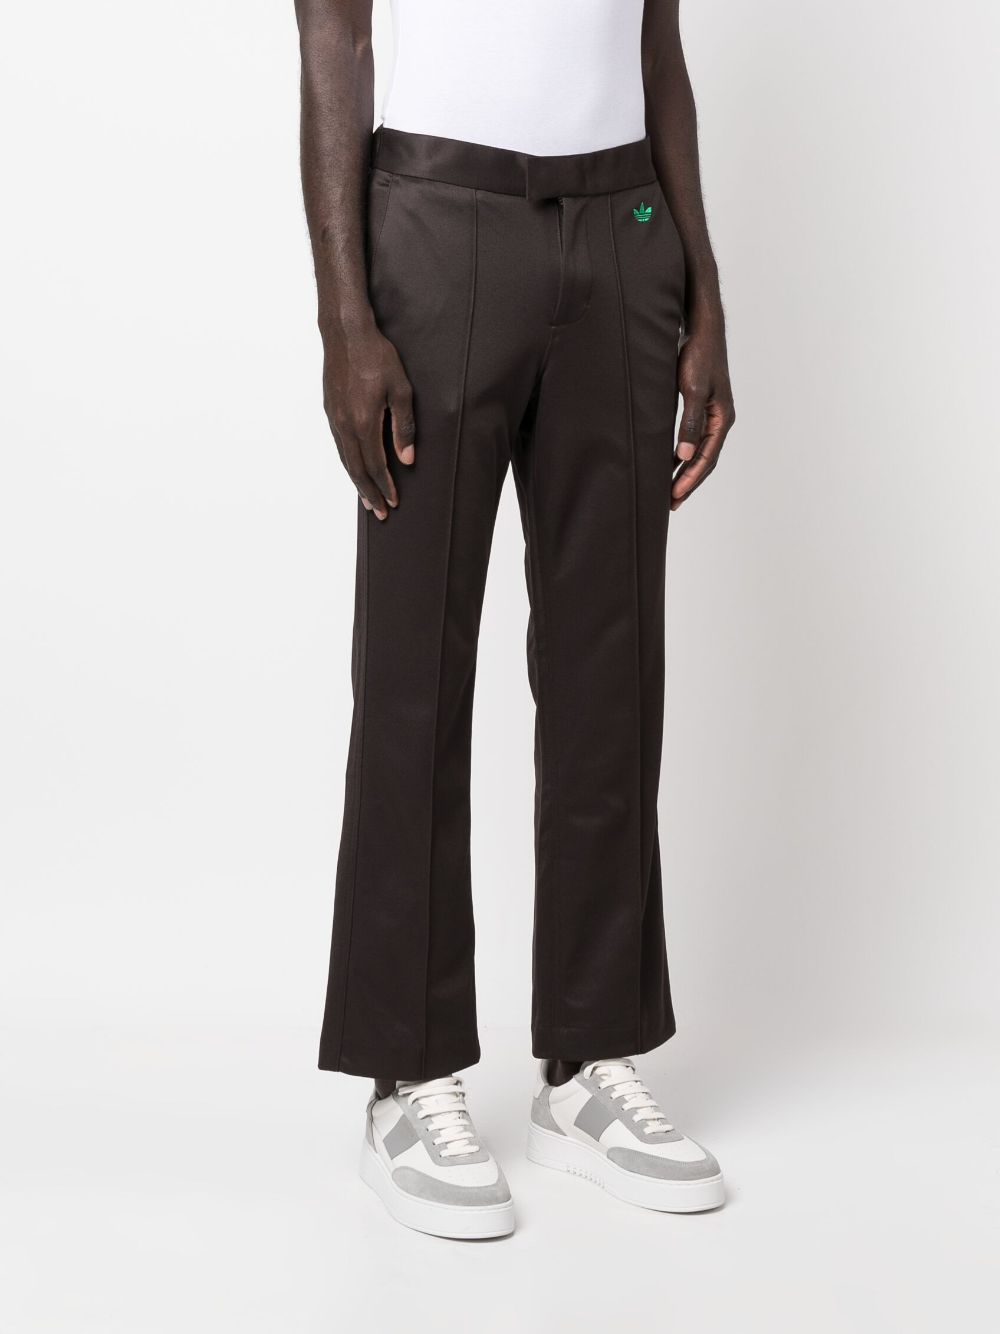 Shop Adidas Originals X Wales Bonner Flared Trousers In Brown